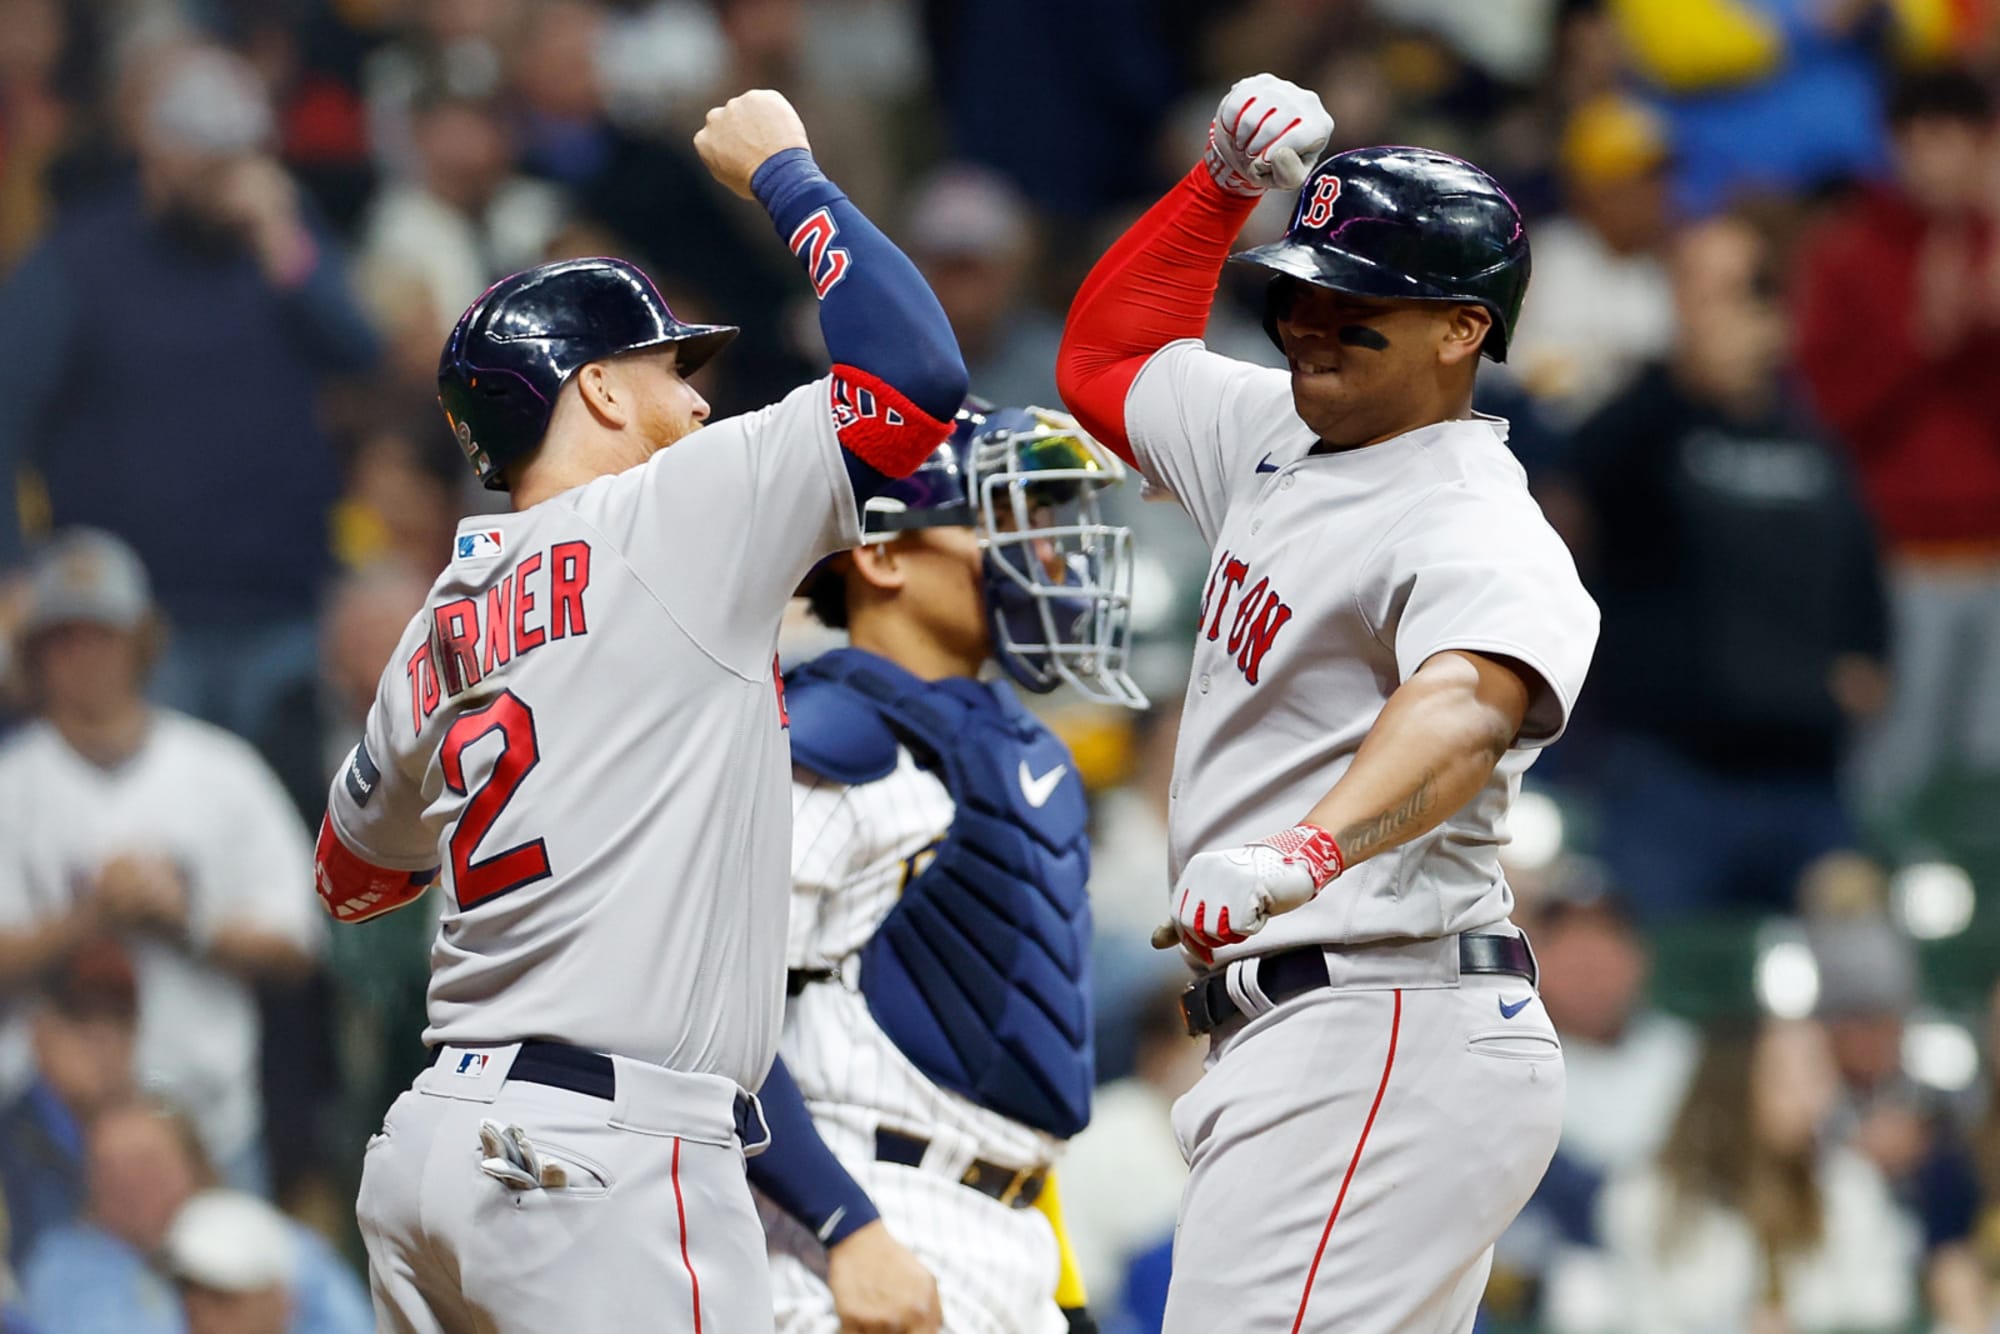 Boston Red Sox are becoming fun to watch and root for again